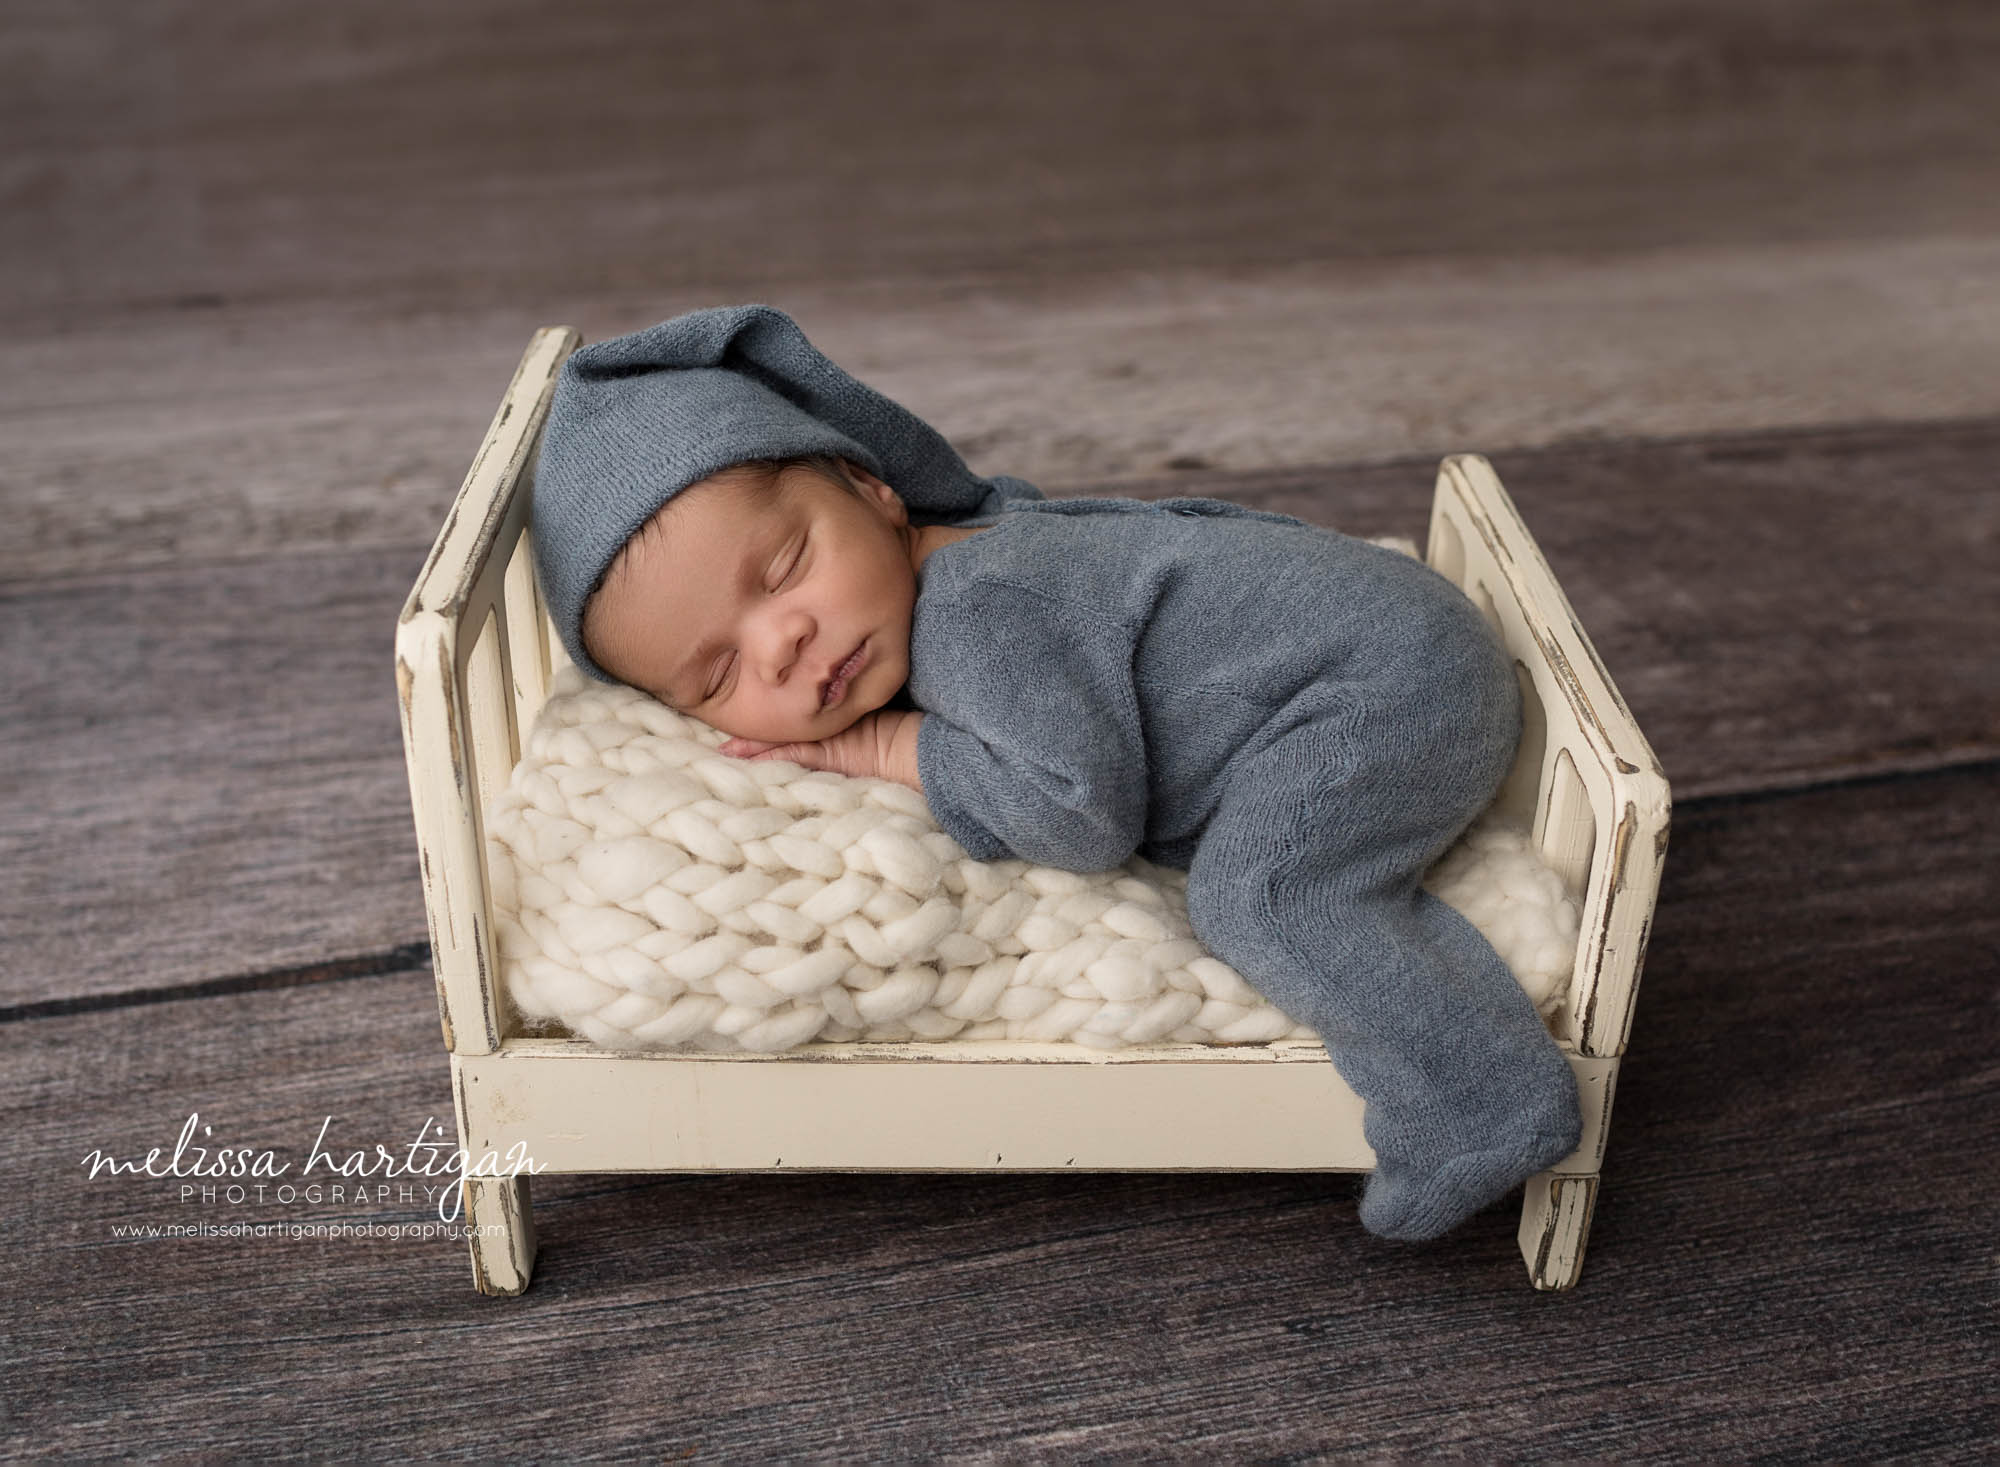 newborn baby boy posed on cream wooden bed prop wearing blue outfit and matching sleepy cap